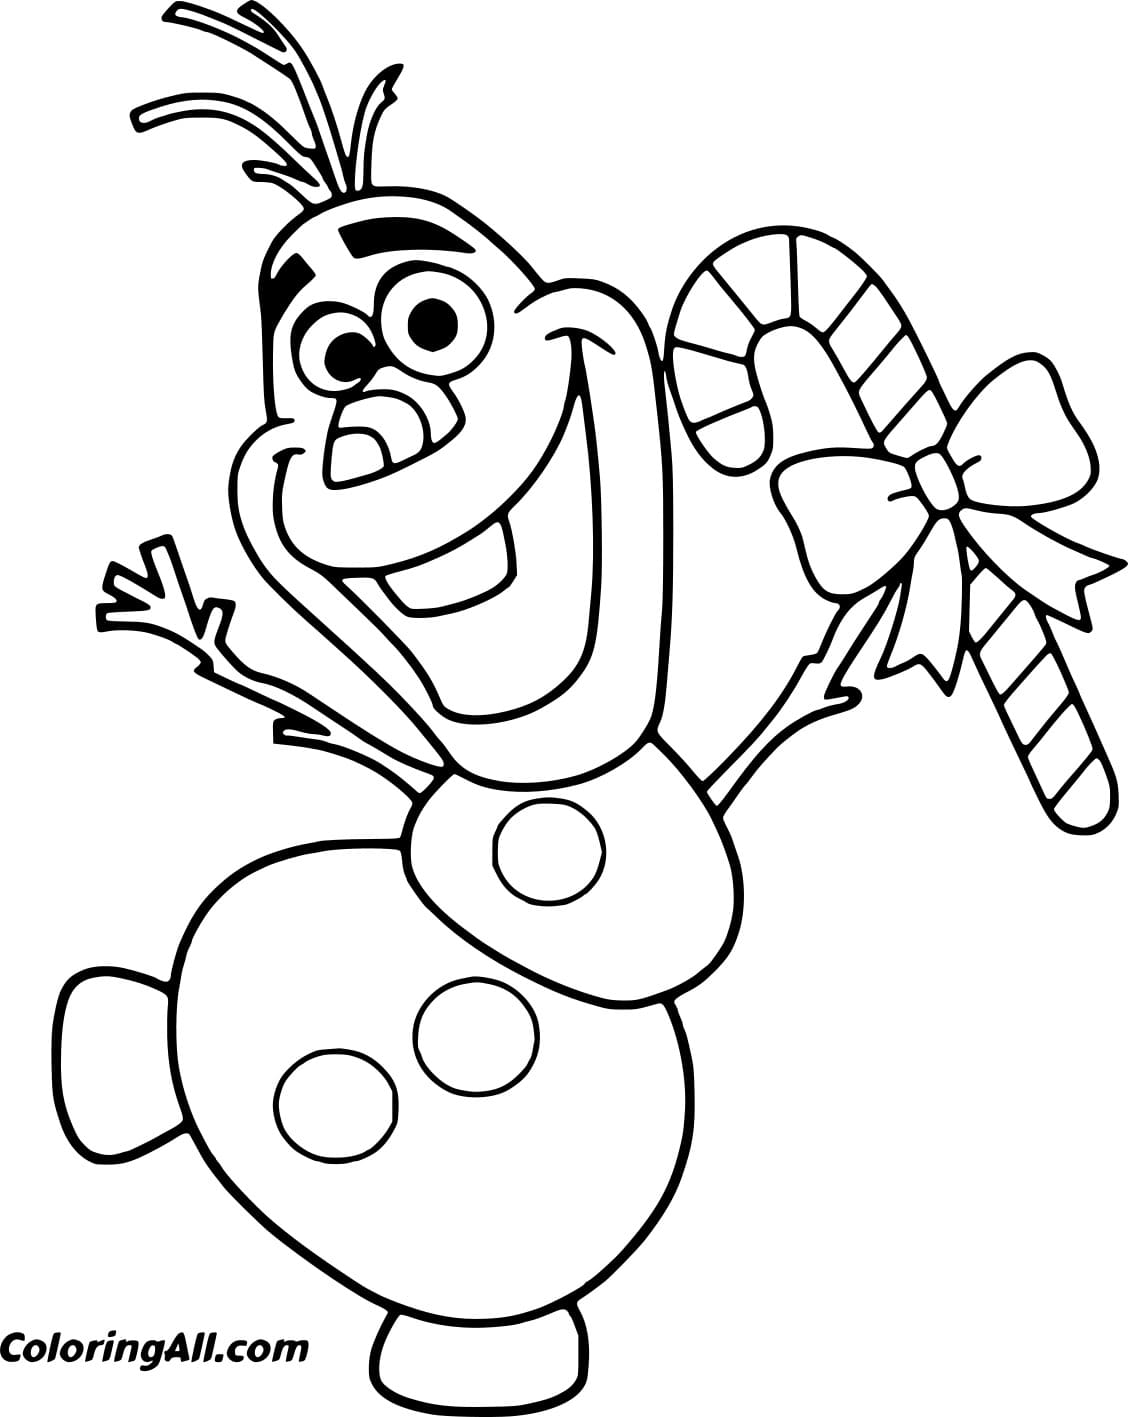 Olaf Holds A Candy Cane Coloring Page